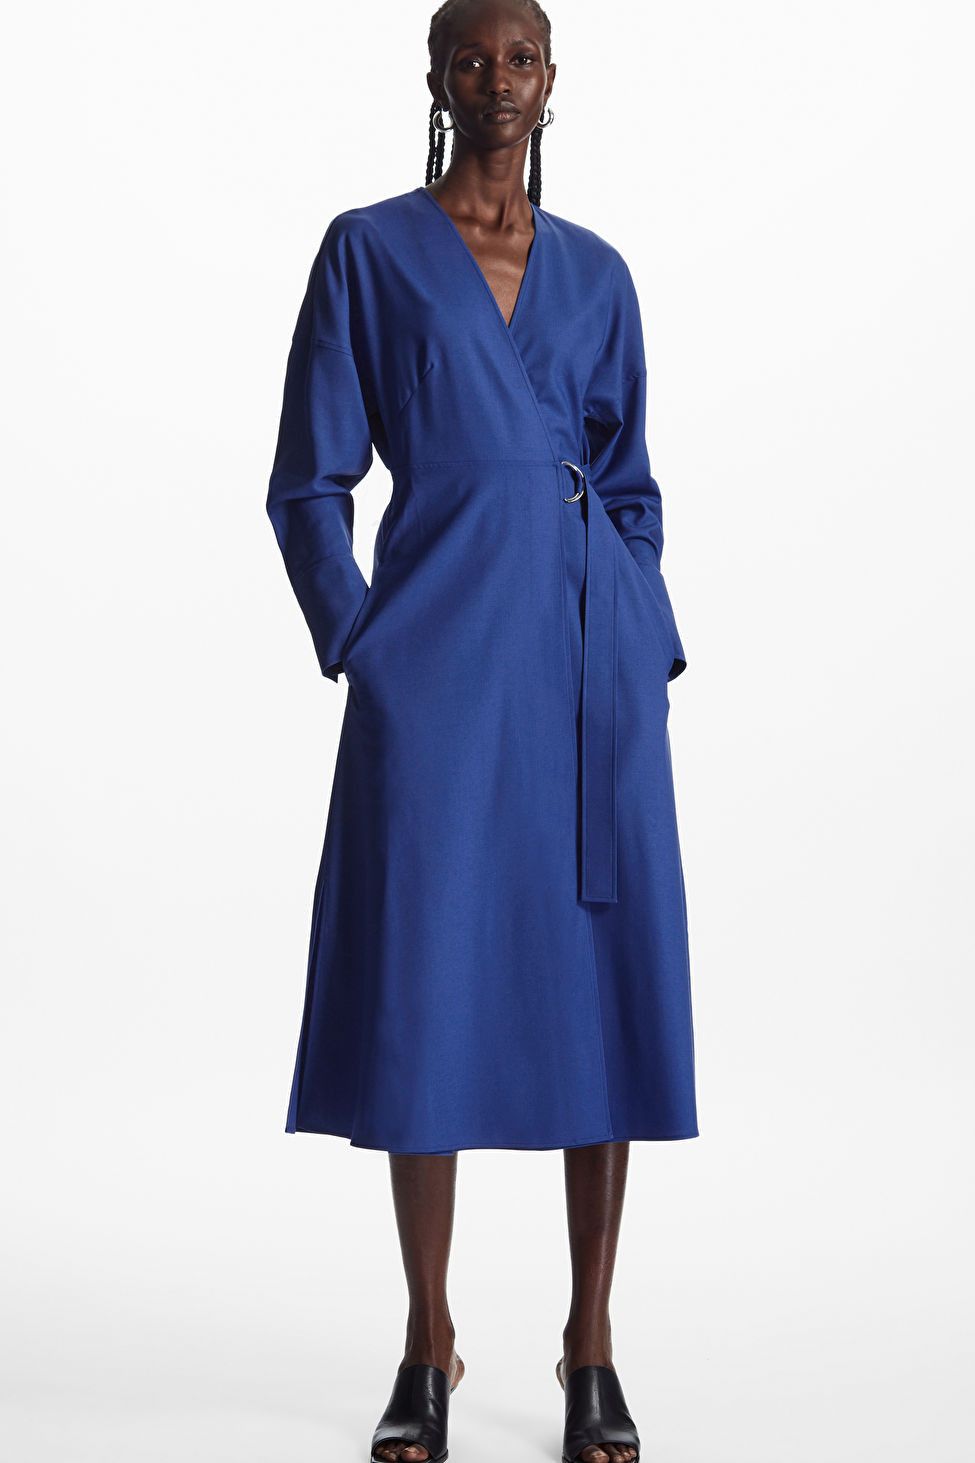 WOOL-CREPE WRAP DRESS | Blue Dress Dresses | Work Wear Style | Business Casual Outfits | COS (US)